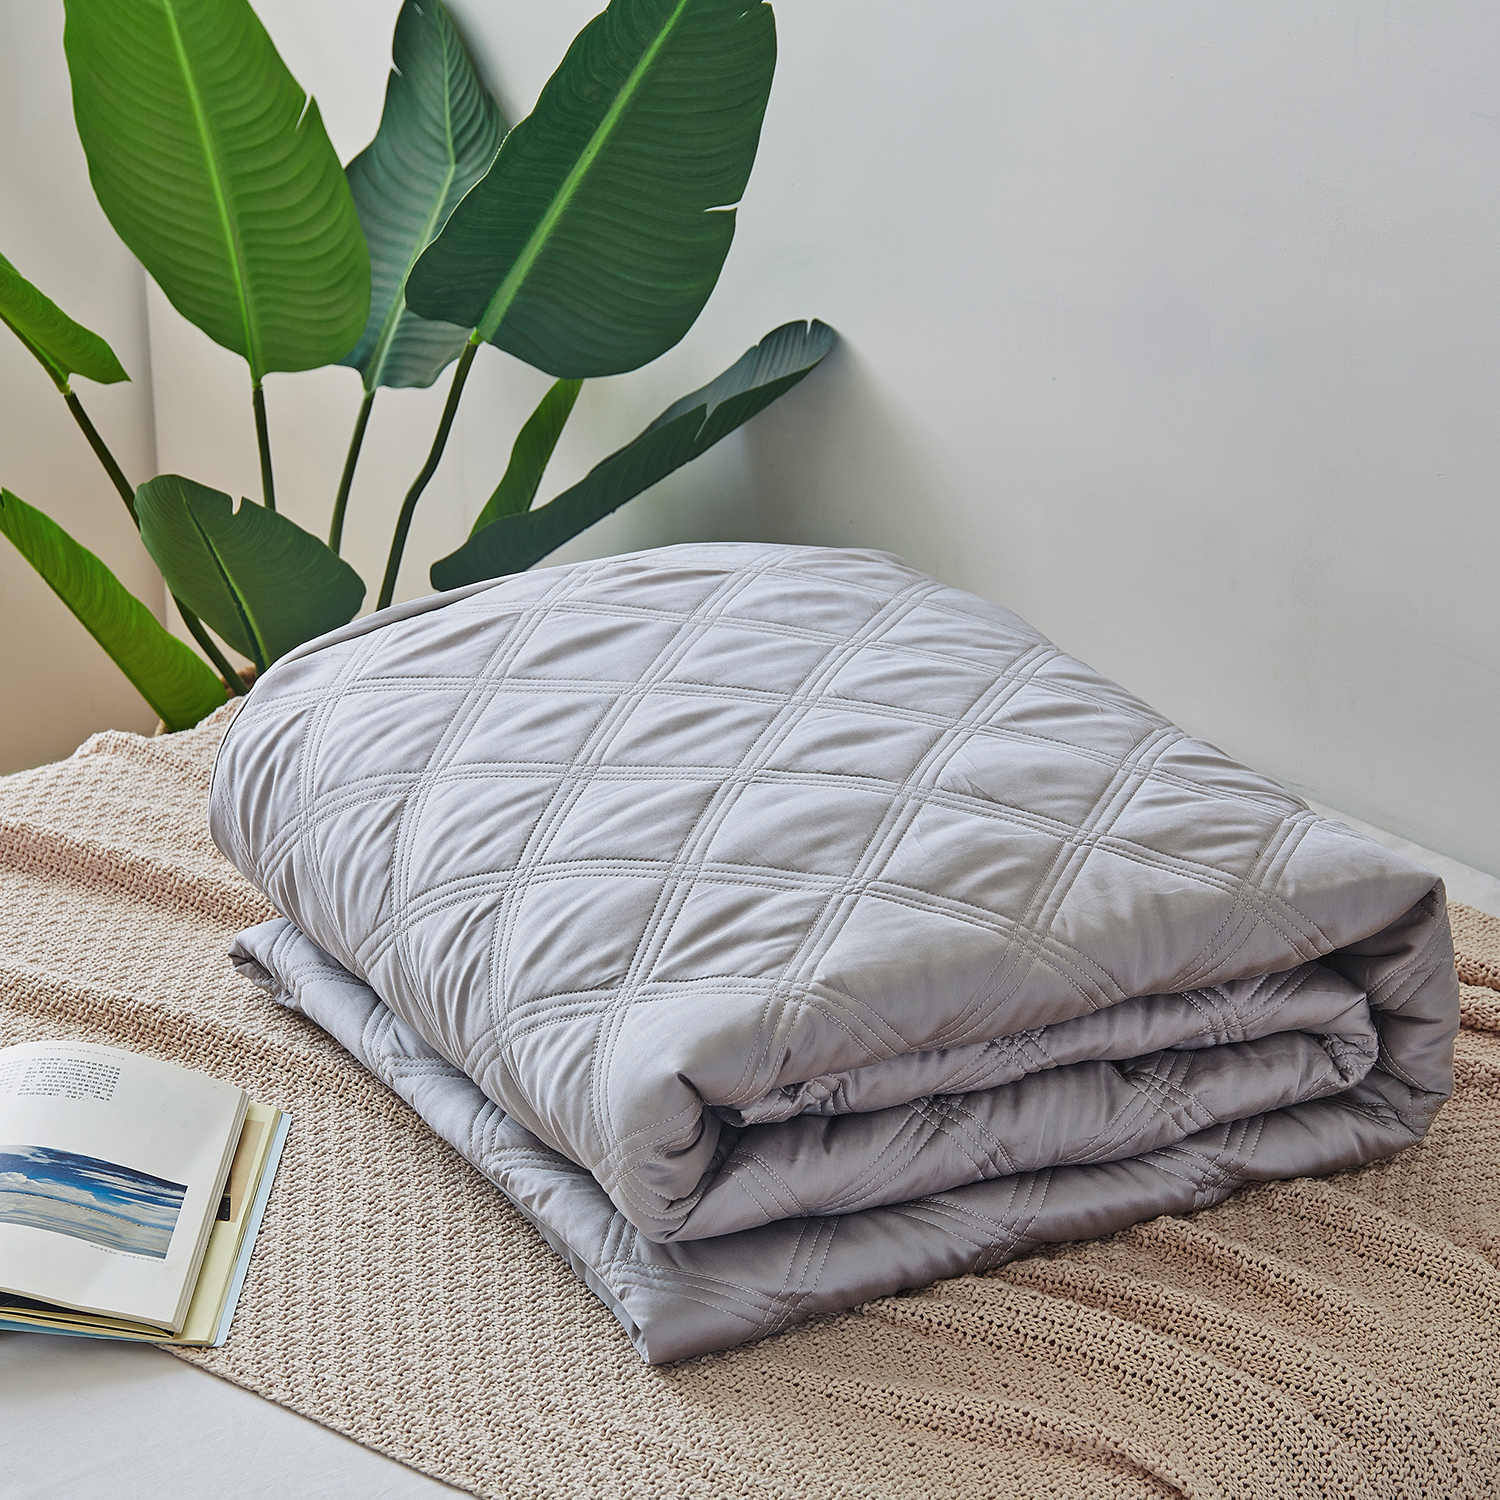 Omystyle Cooling Weighted Blanket Cover, Can You Put A Duvet Cover On Weighted Blanket